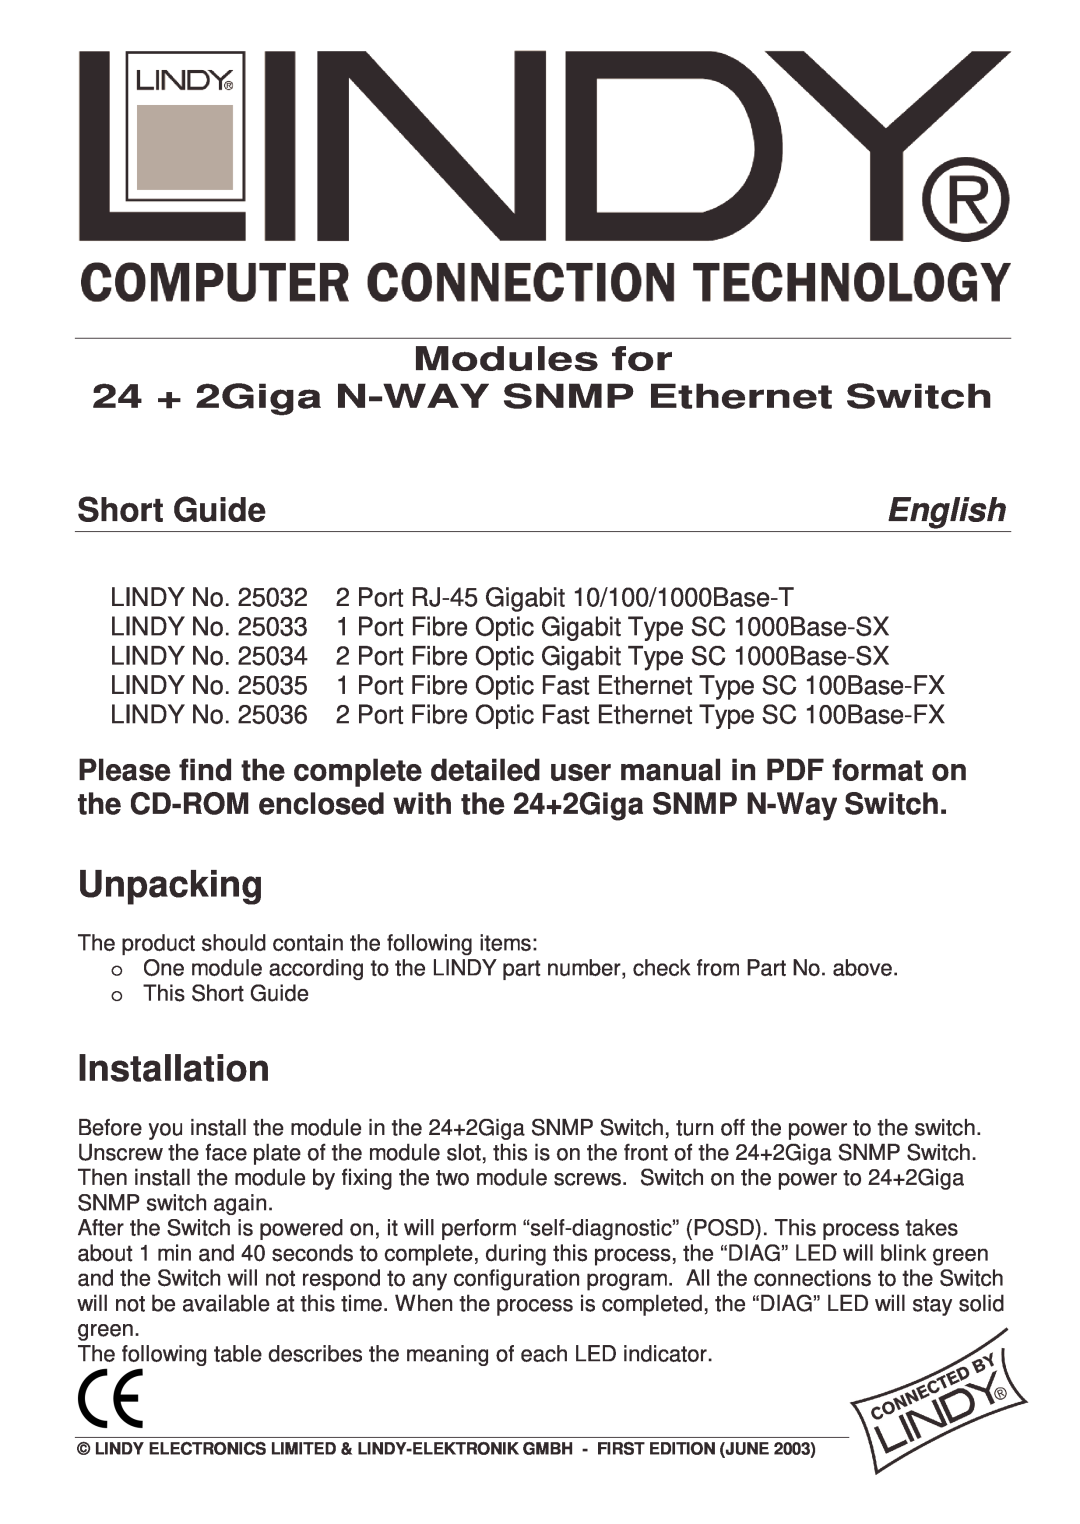 Lindy 25035 user manual Unpacking, Installation, Modules for 24 + 2Giga N-WAY SNMP Ethernet Switch, Short Guide, English 